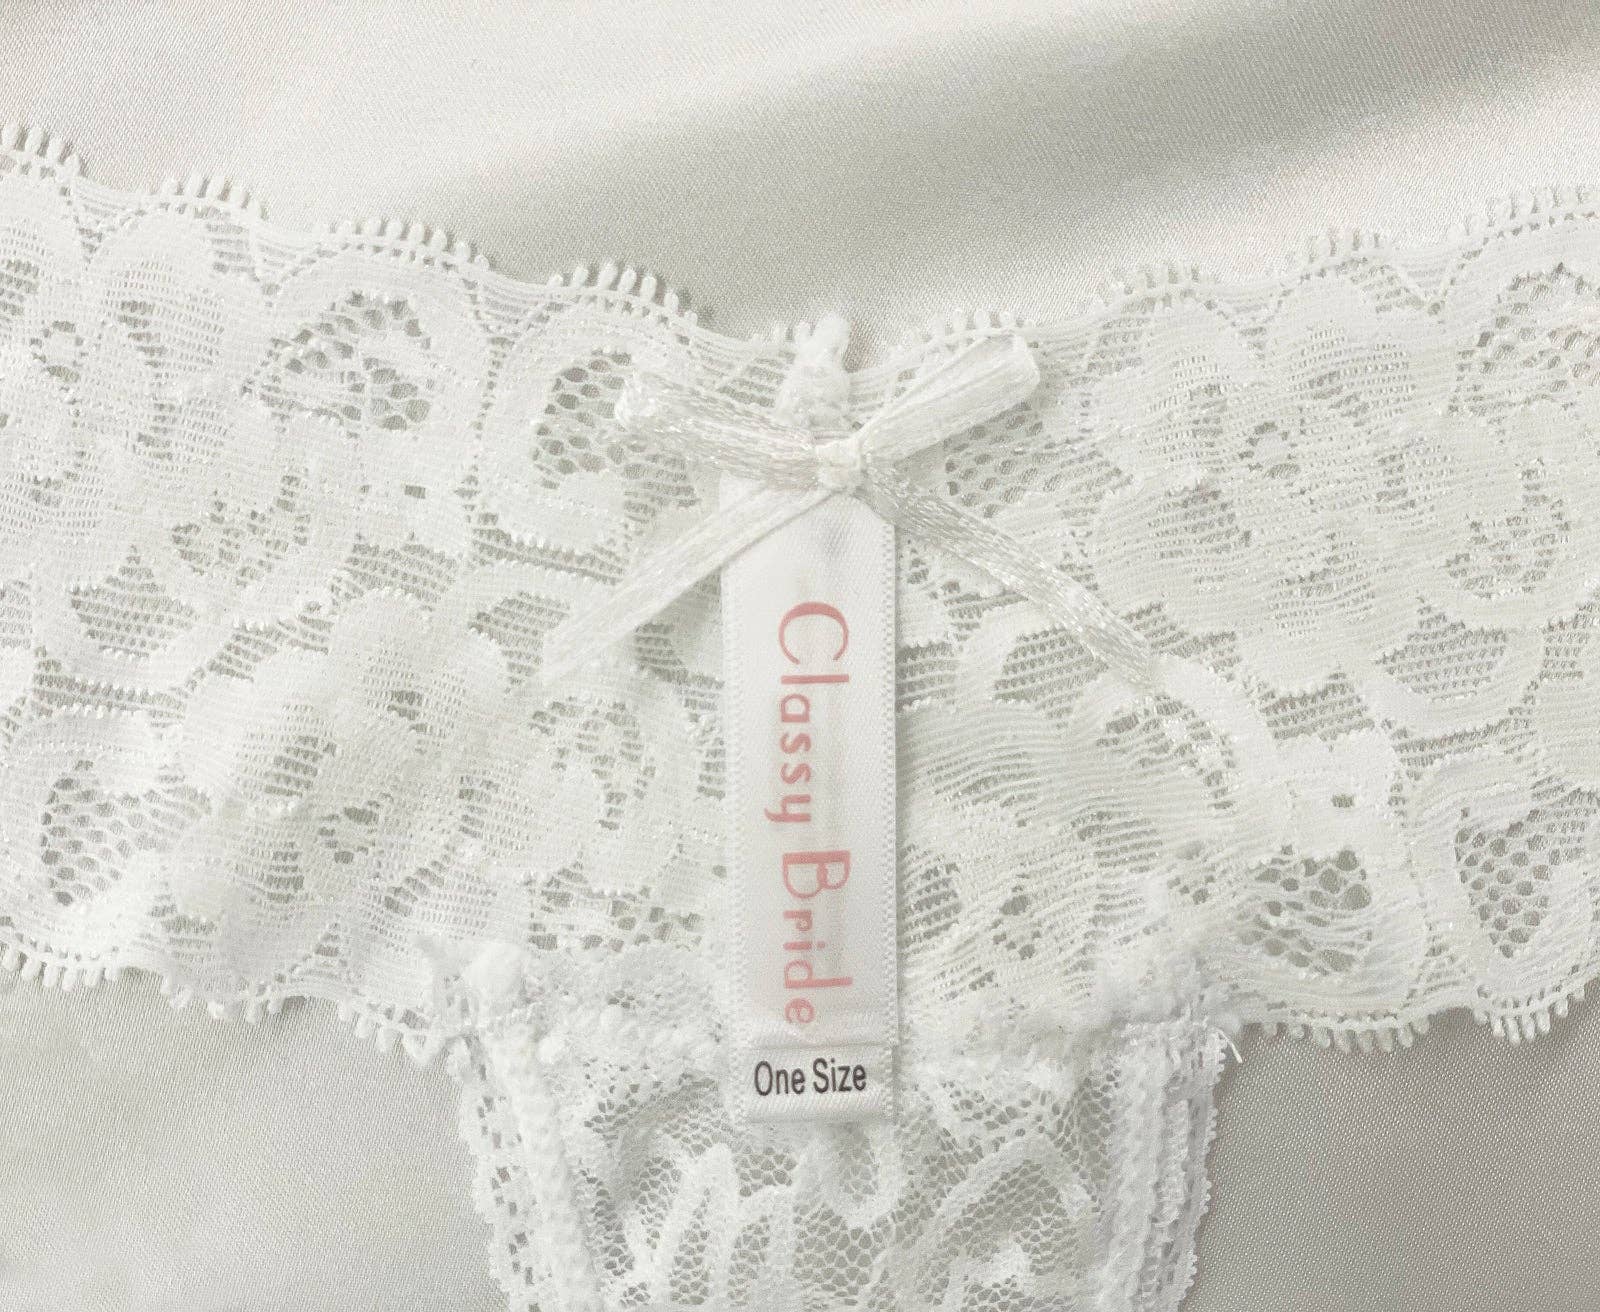 Classy Bride - Darling Lace I Do Thong